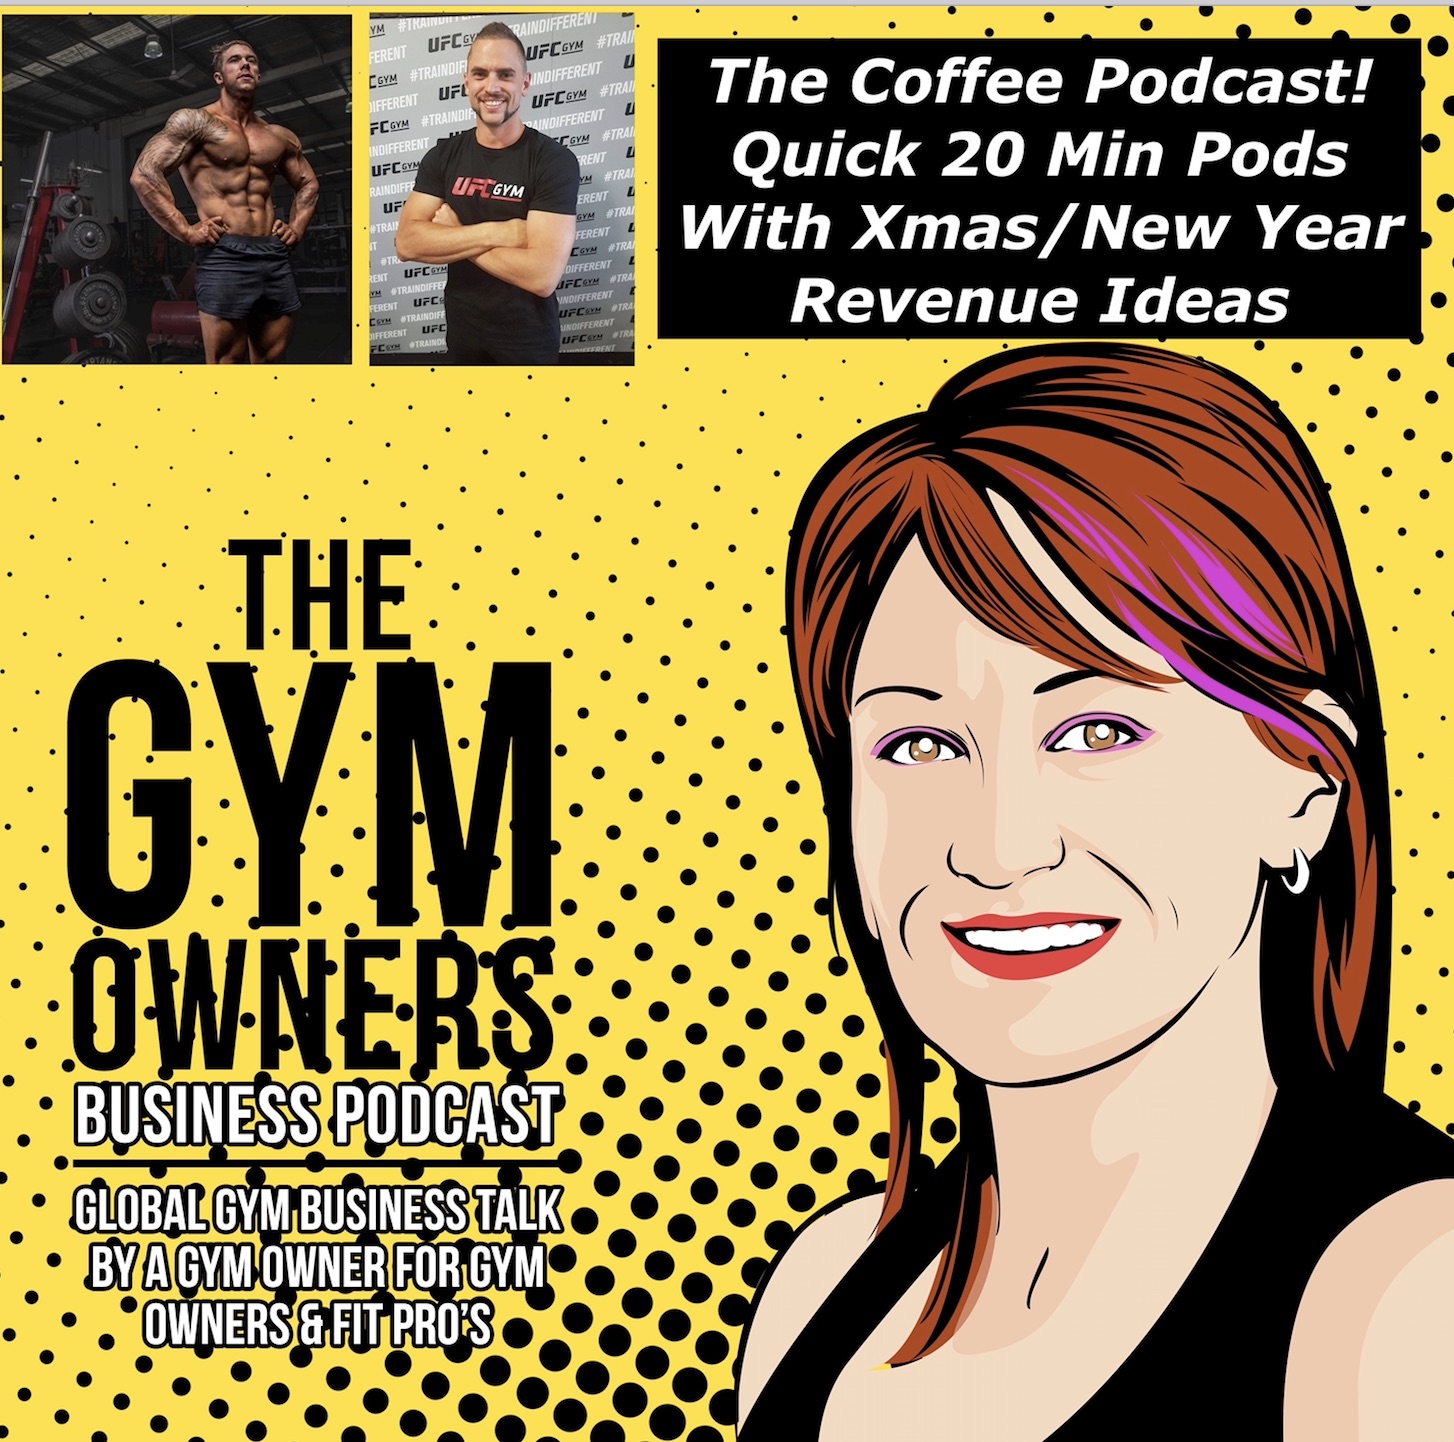 The Coffee Podcast ’20 Minute Ideas That Raise Revenue’